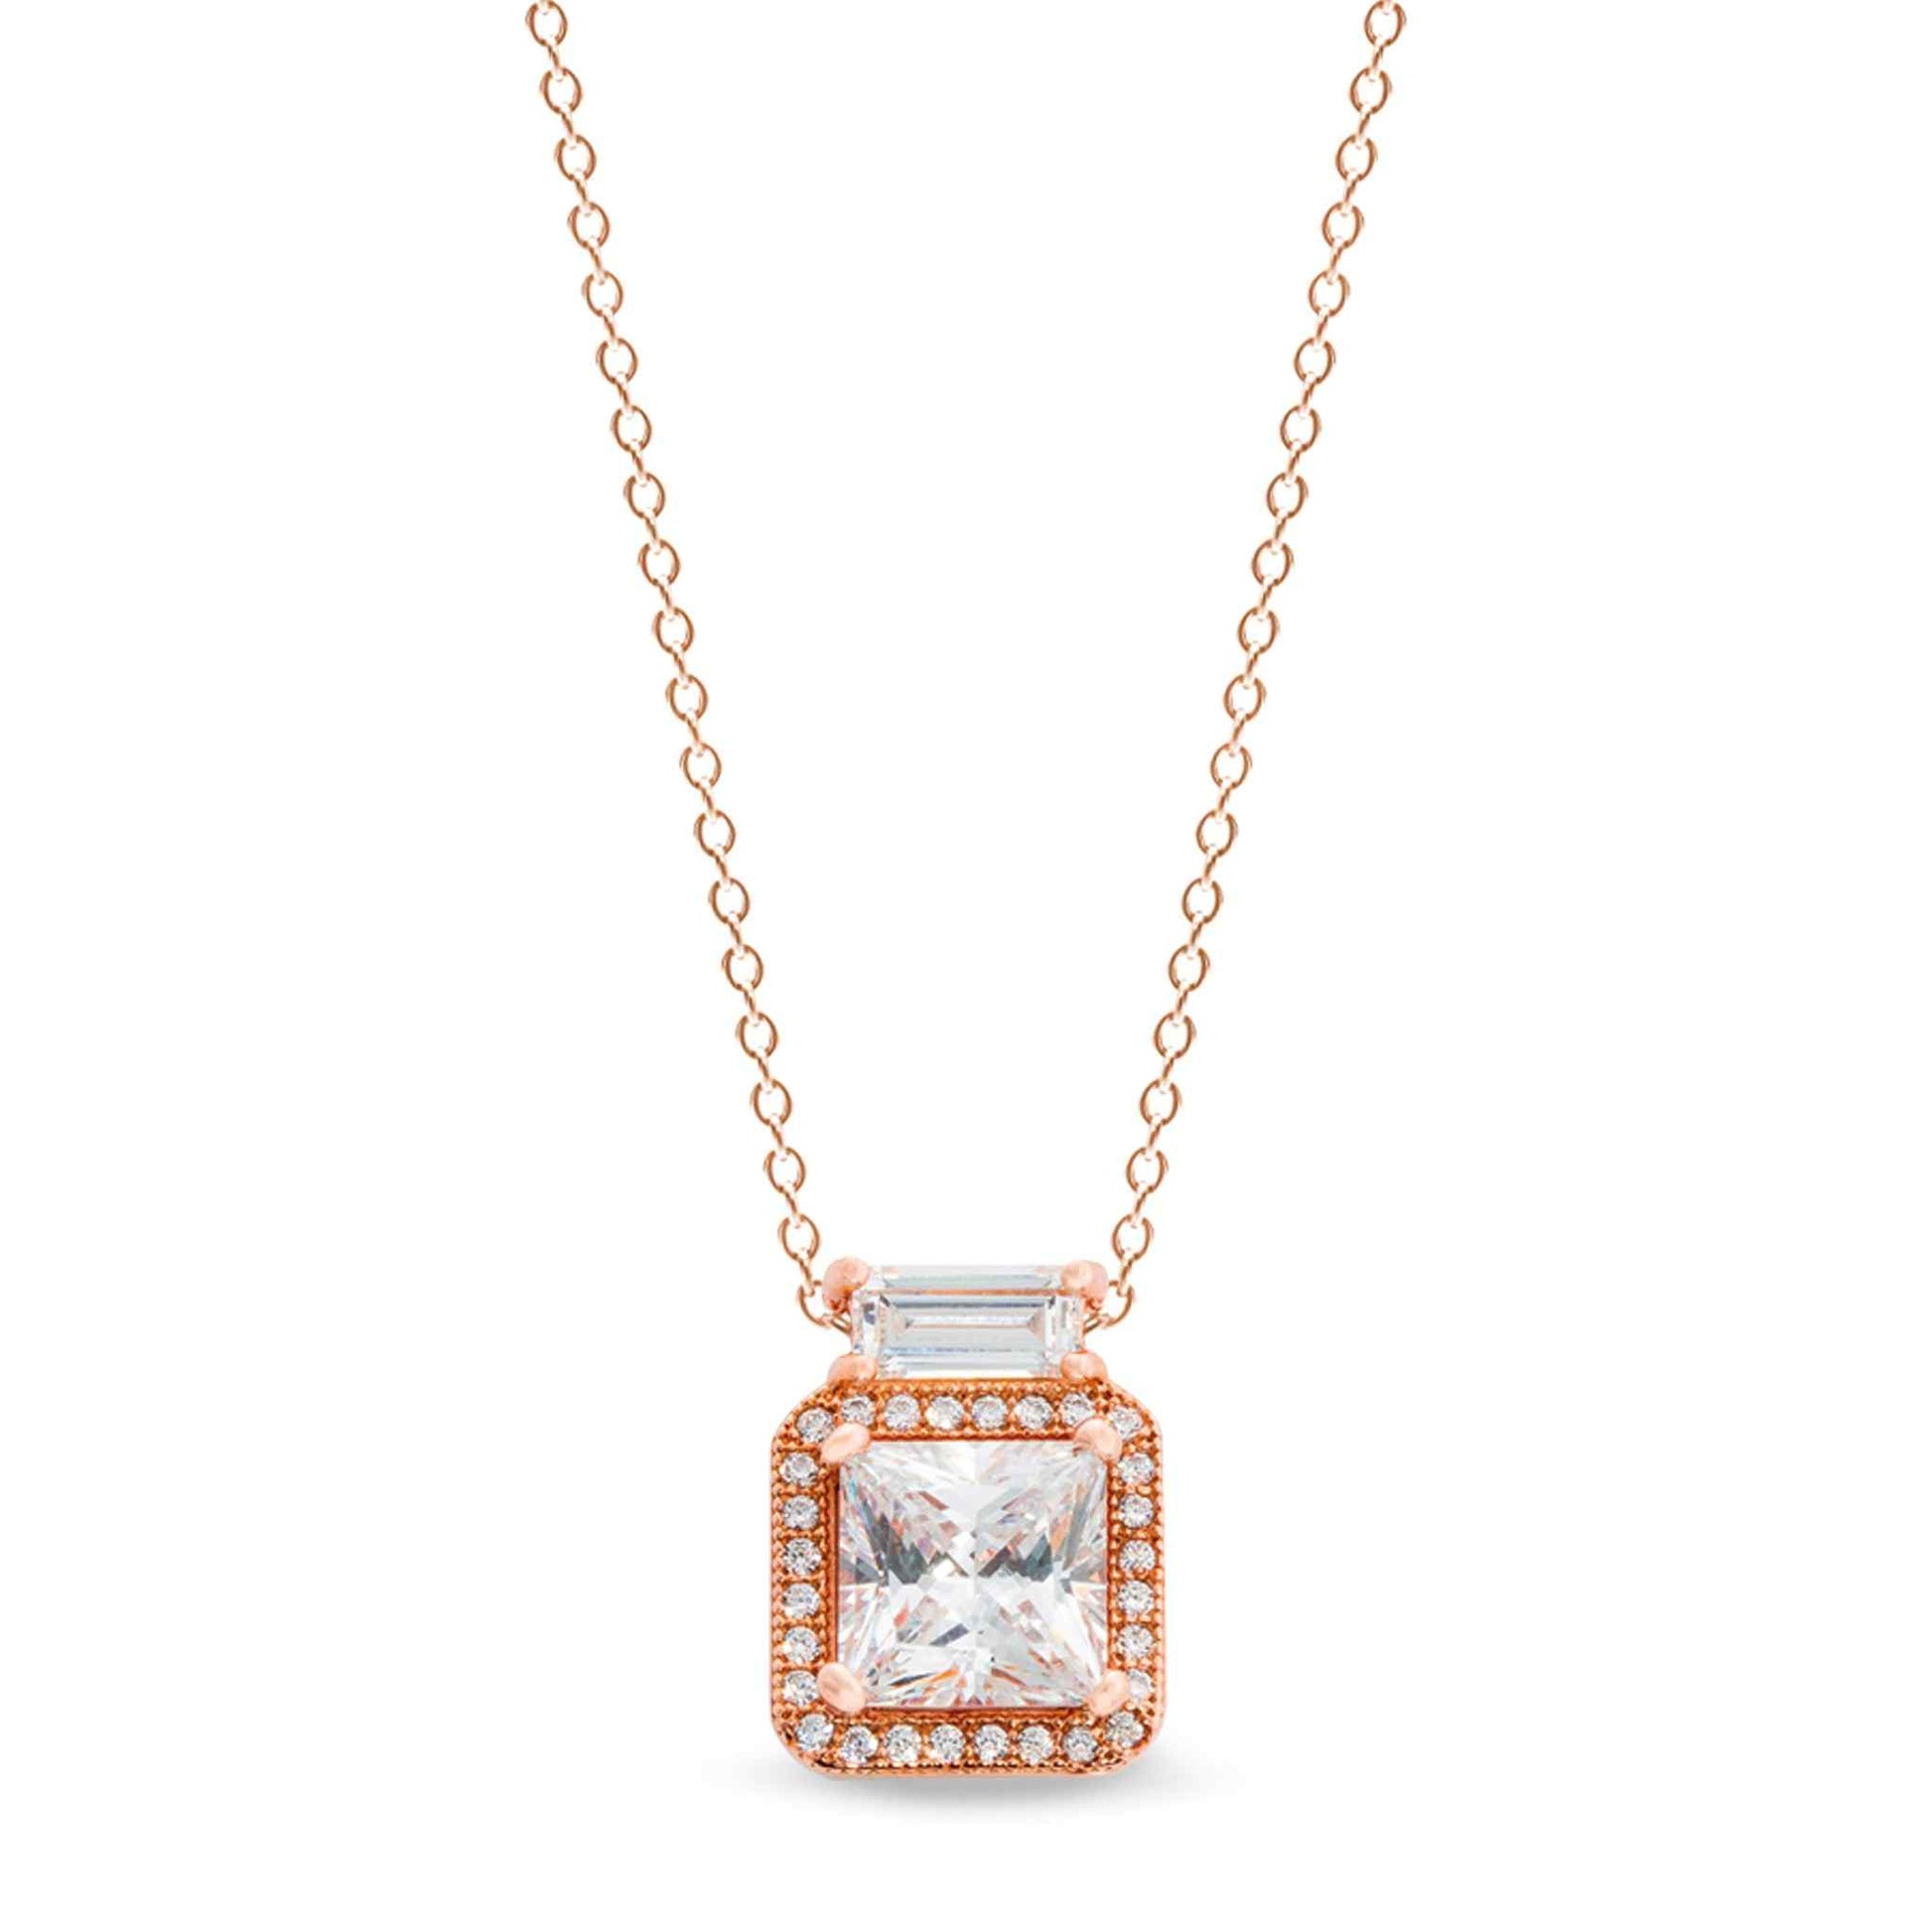 A sterling silver princess cut necklace with 30 simulated diamonds displayed on a neutral white background.